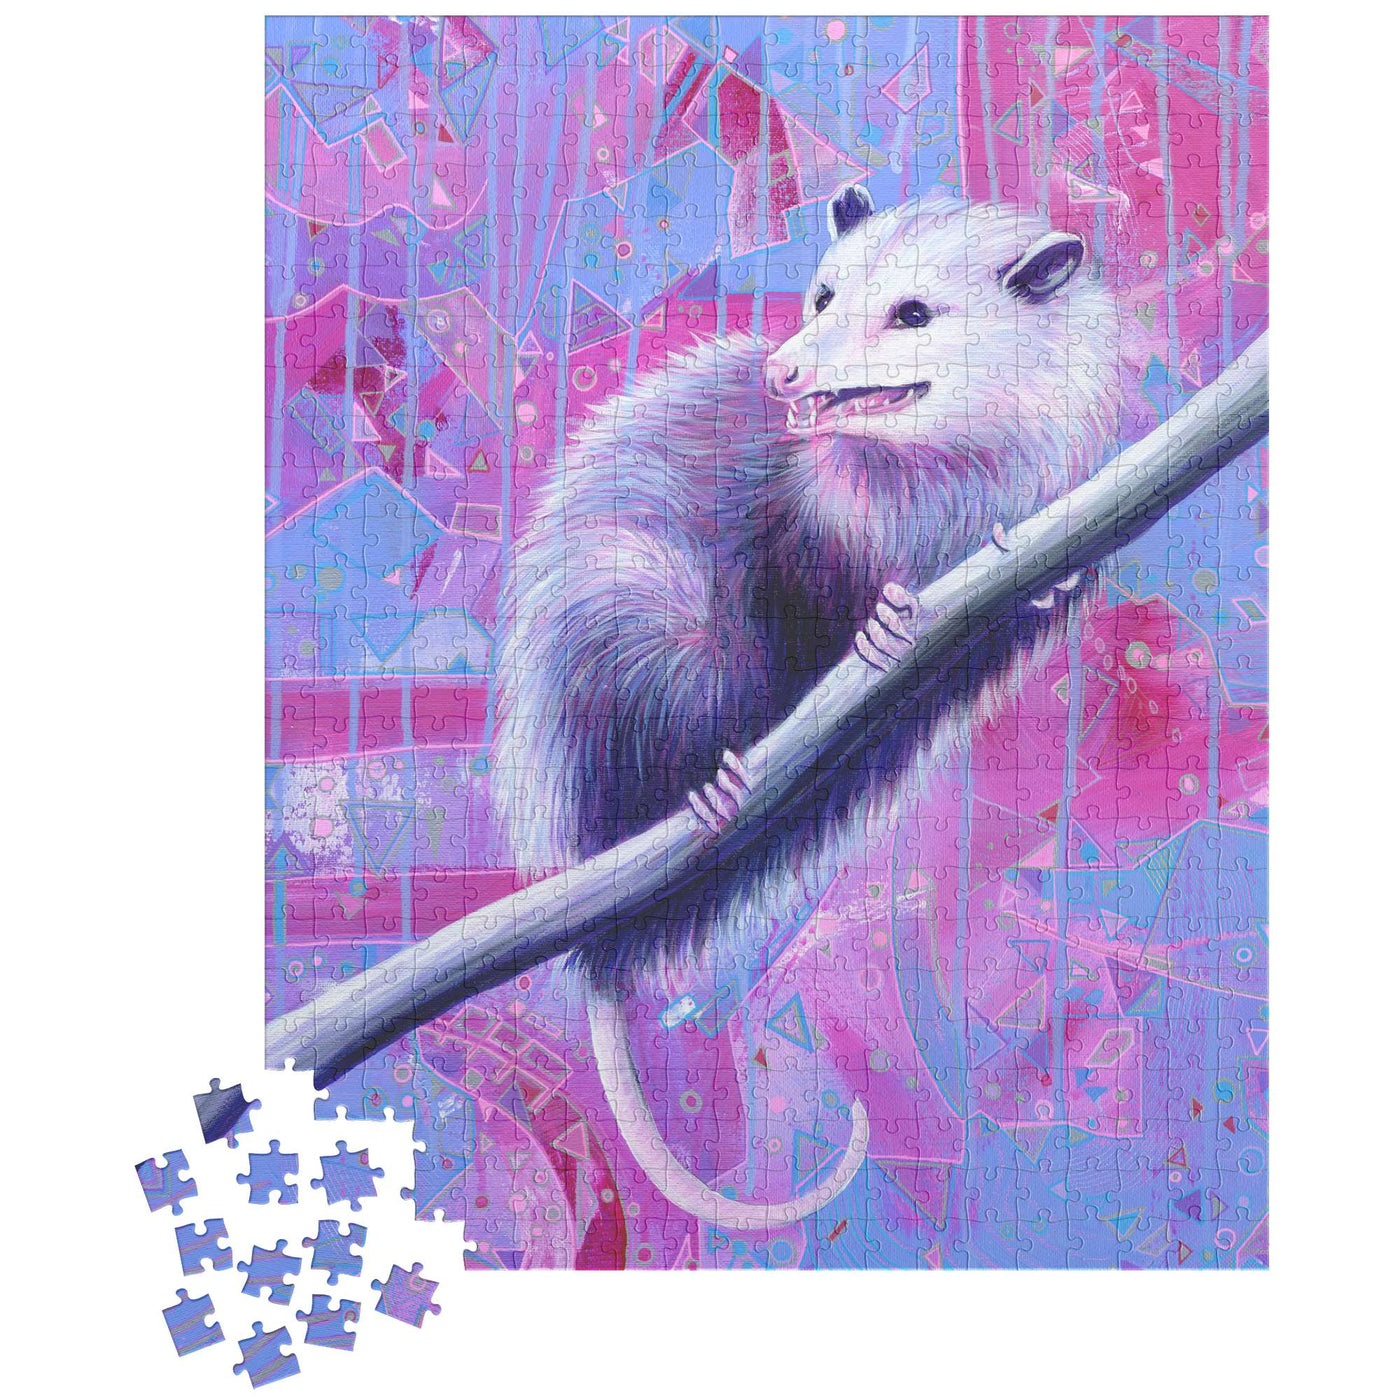 A white Opossum Puzzle showcasing an opossum with detailed fur texture, clinging to a narrow branch against a vibrant pink and blue geometric background, with puzzle pieces scattered in the corner.